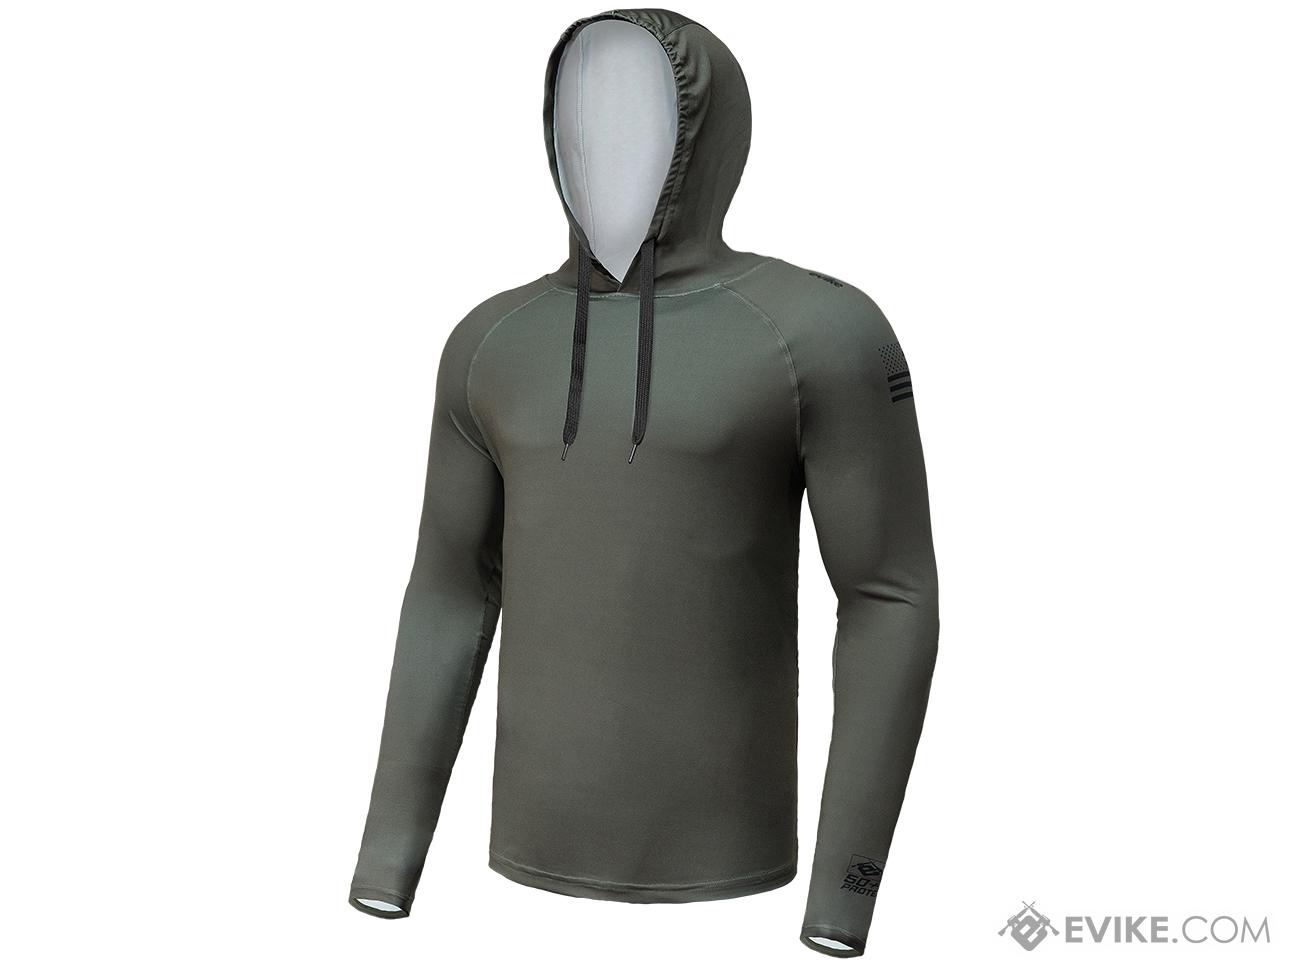 Evike.com Helium Armour UPF50 Body Protective Battle Hoodie for Fishing / Airsoft (Color: Foliage Green / Medium)